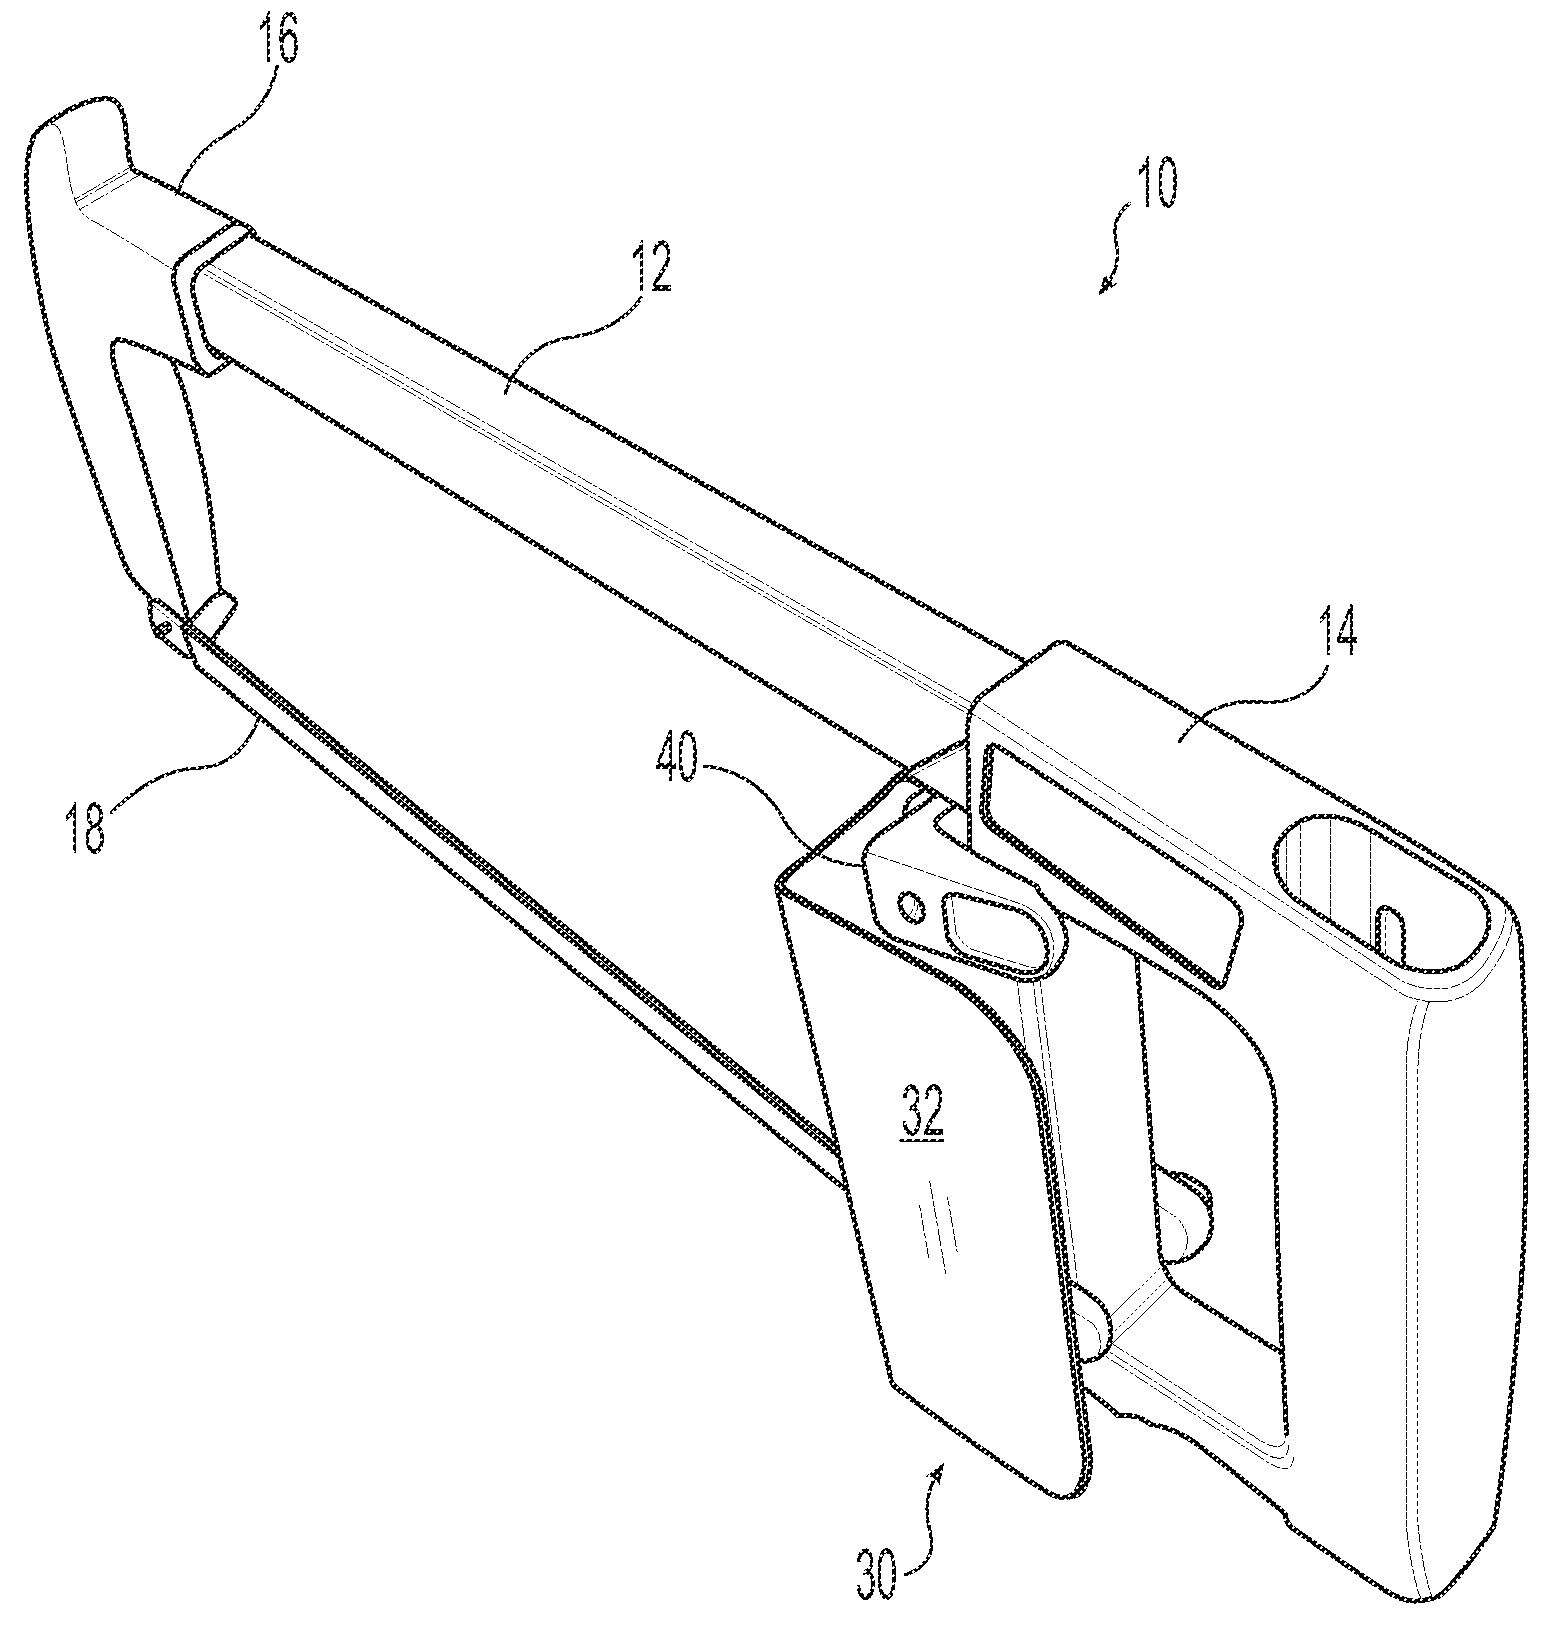 Hand guard for use with saws